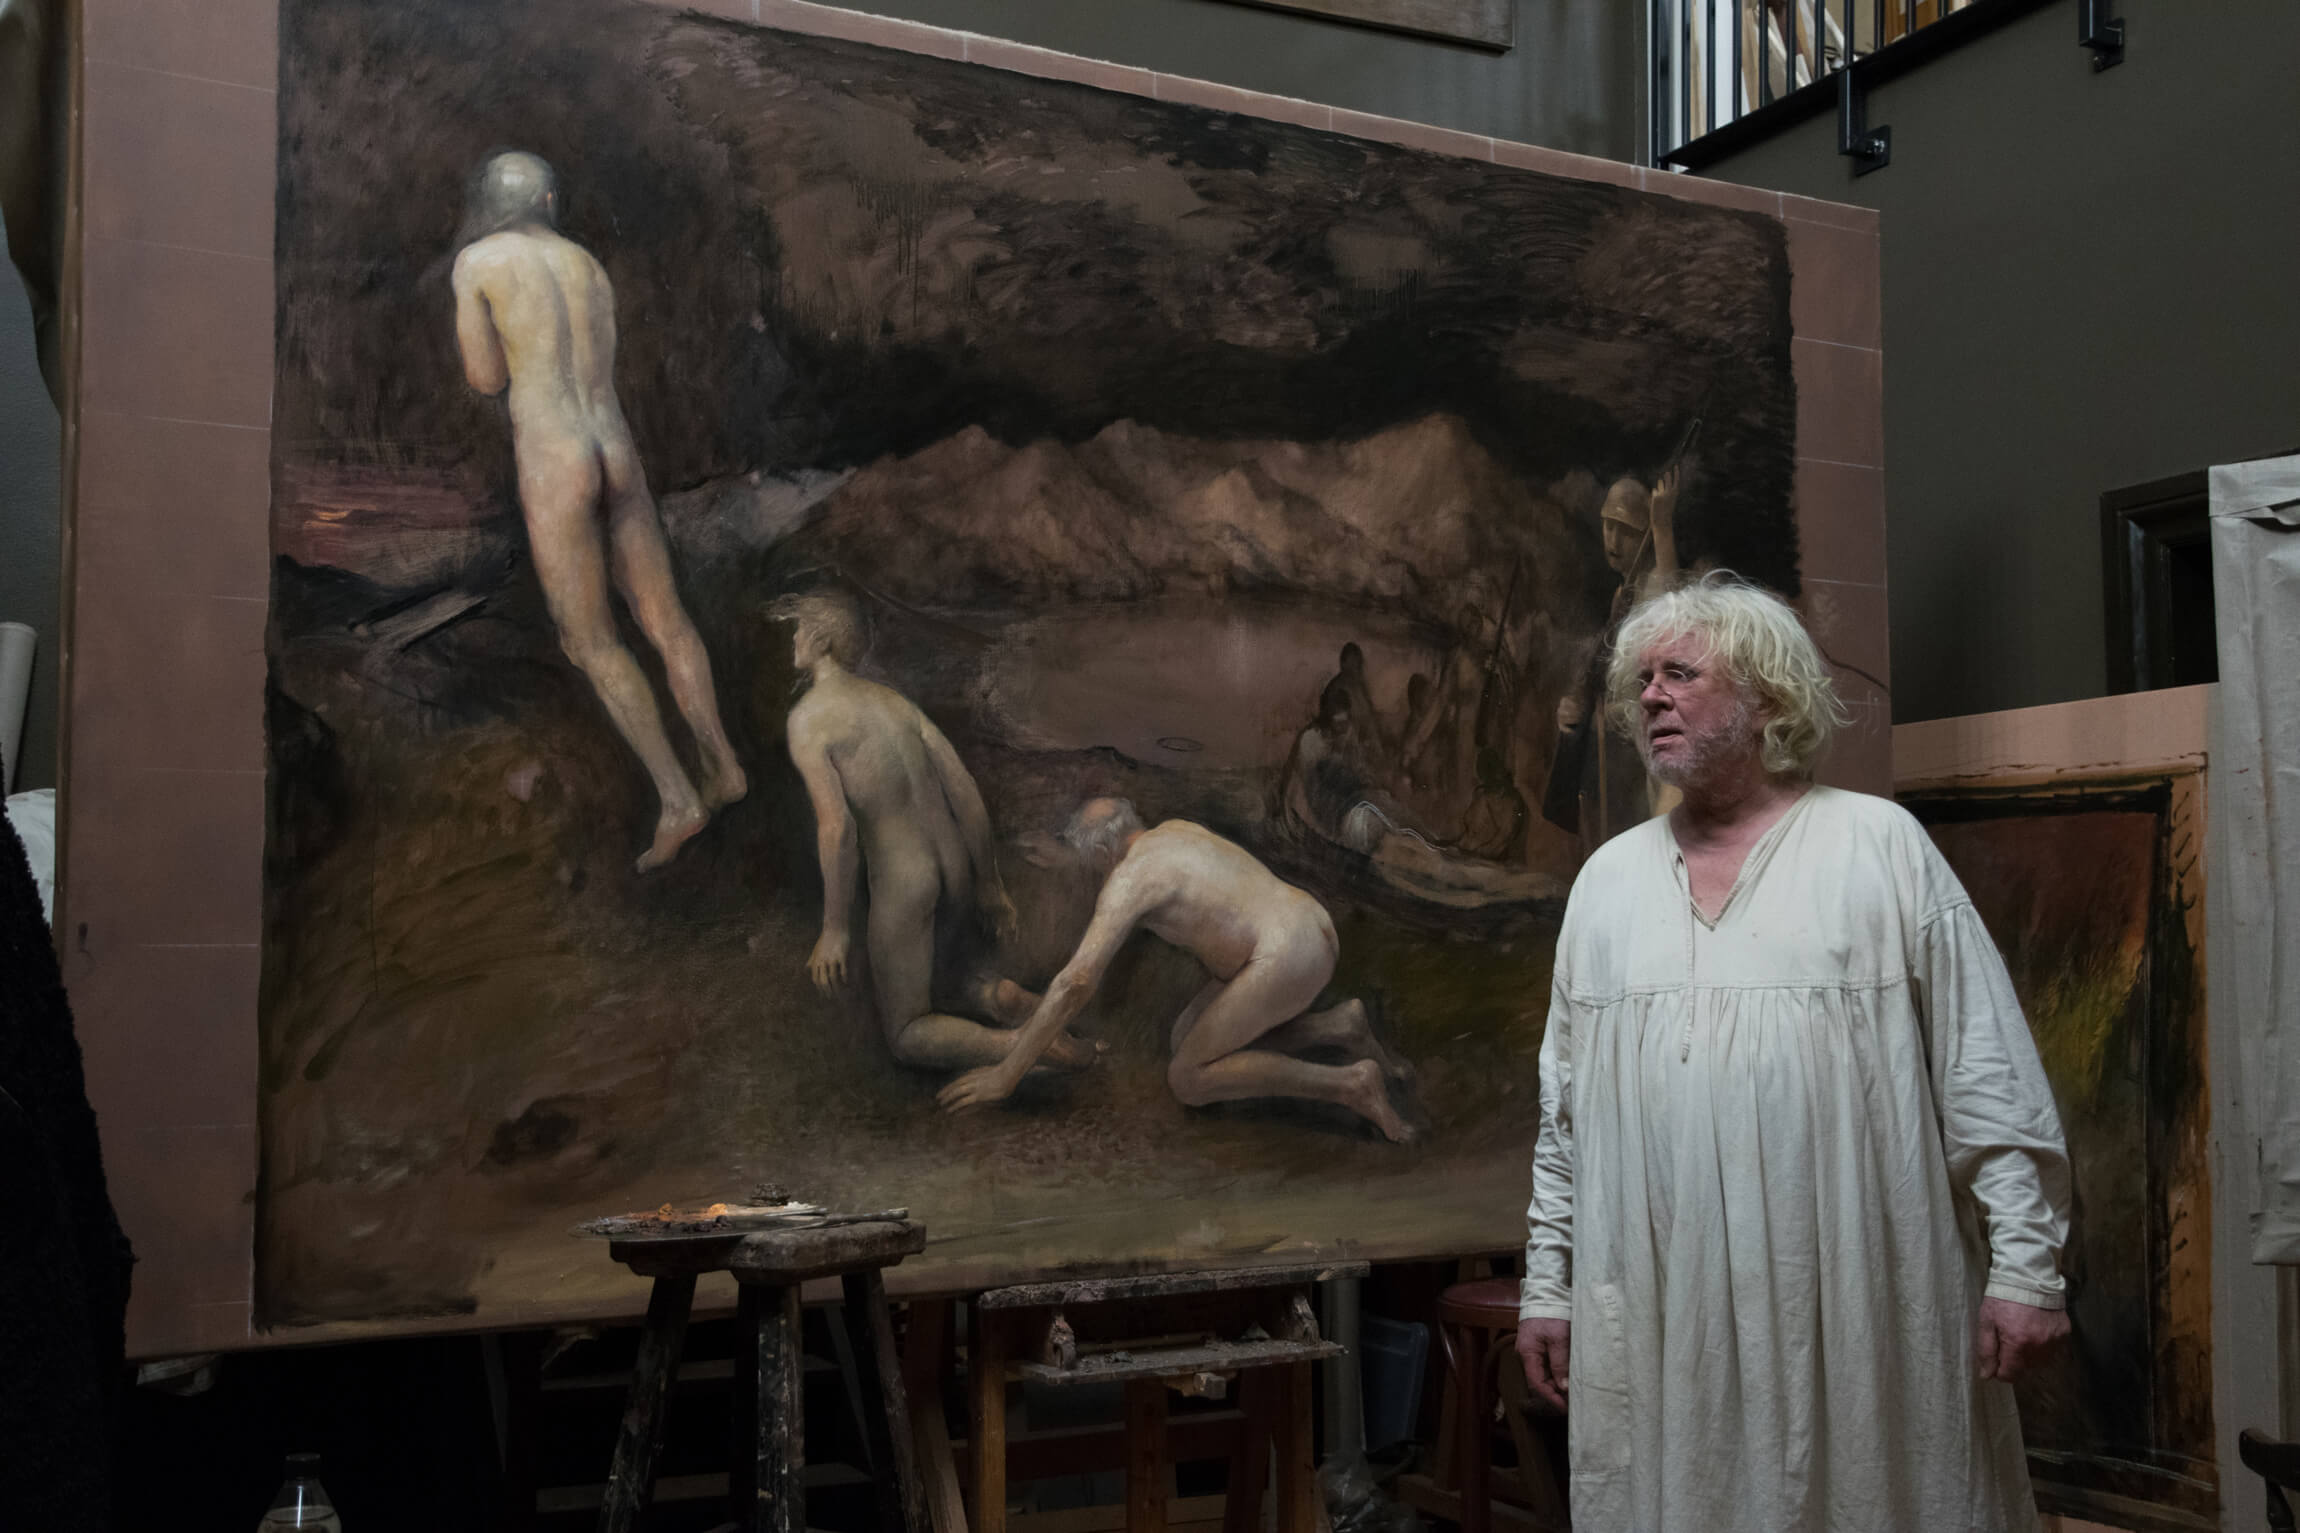 After the Flood”: Odd Nerdrum Exhibiting New Paintings in Los Angeles